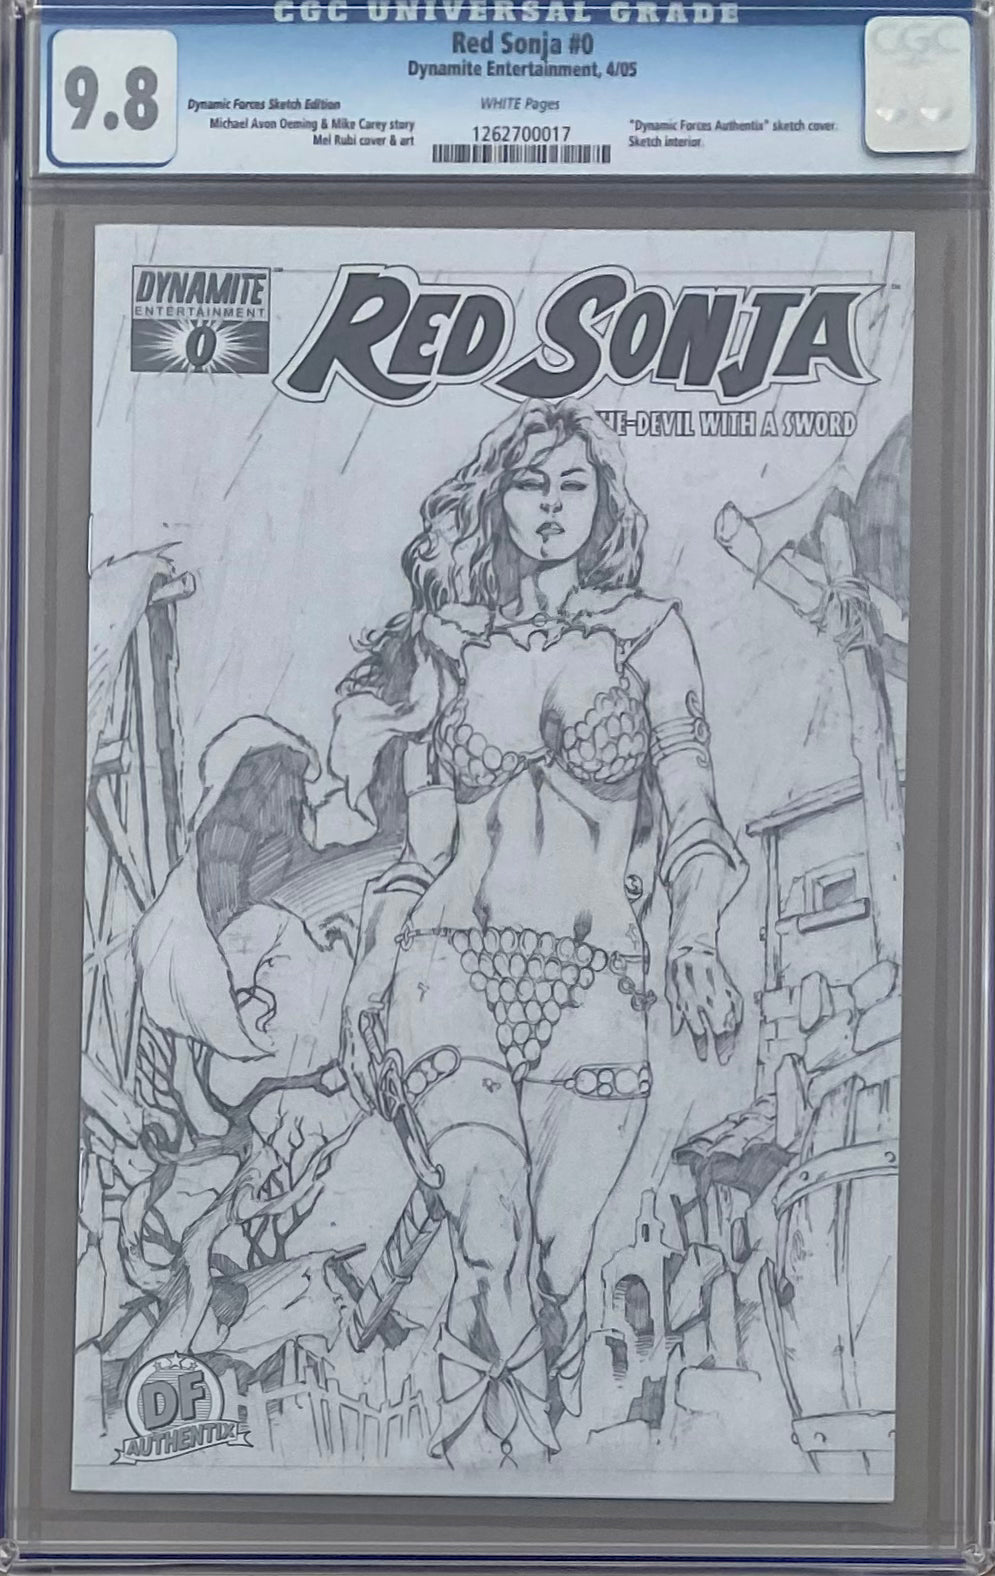 Red Sonja #0 Dynamic Forces Sketch Edition CGC 9.8